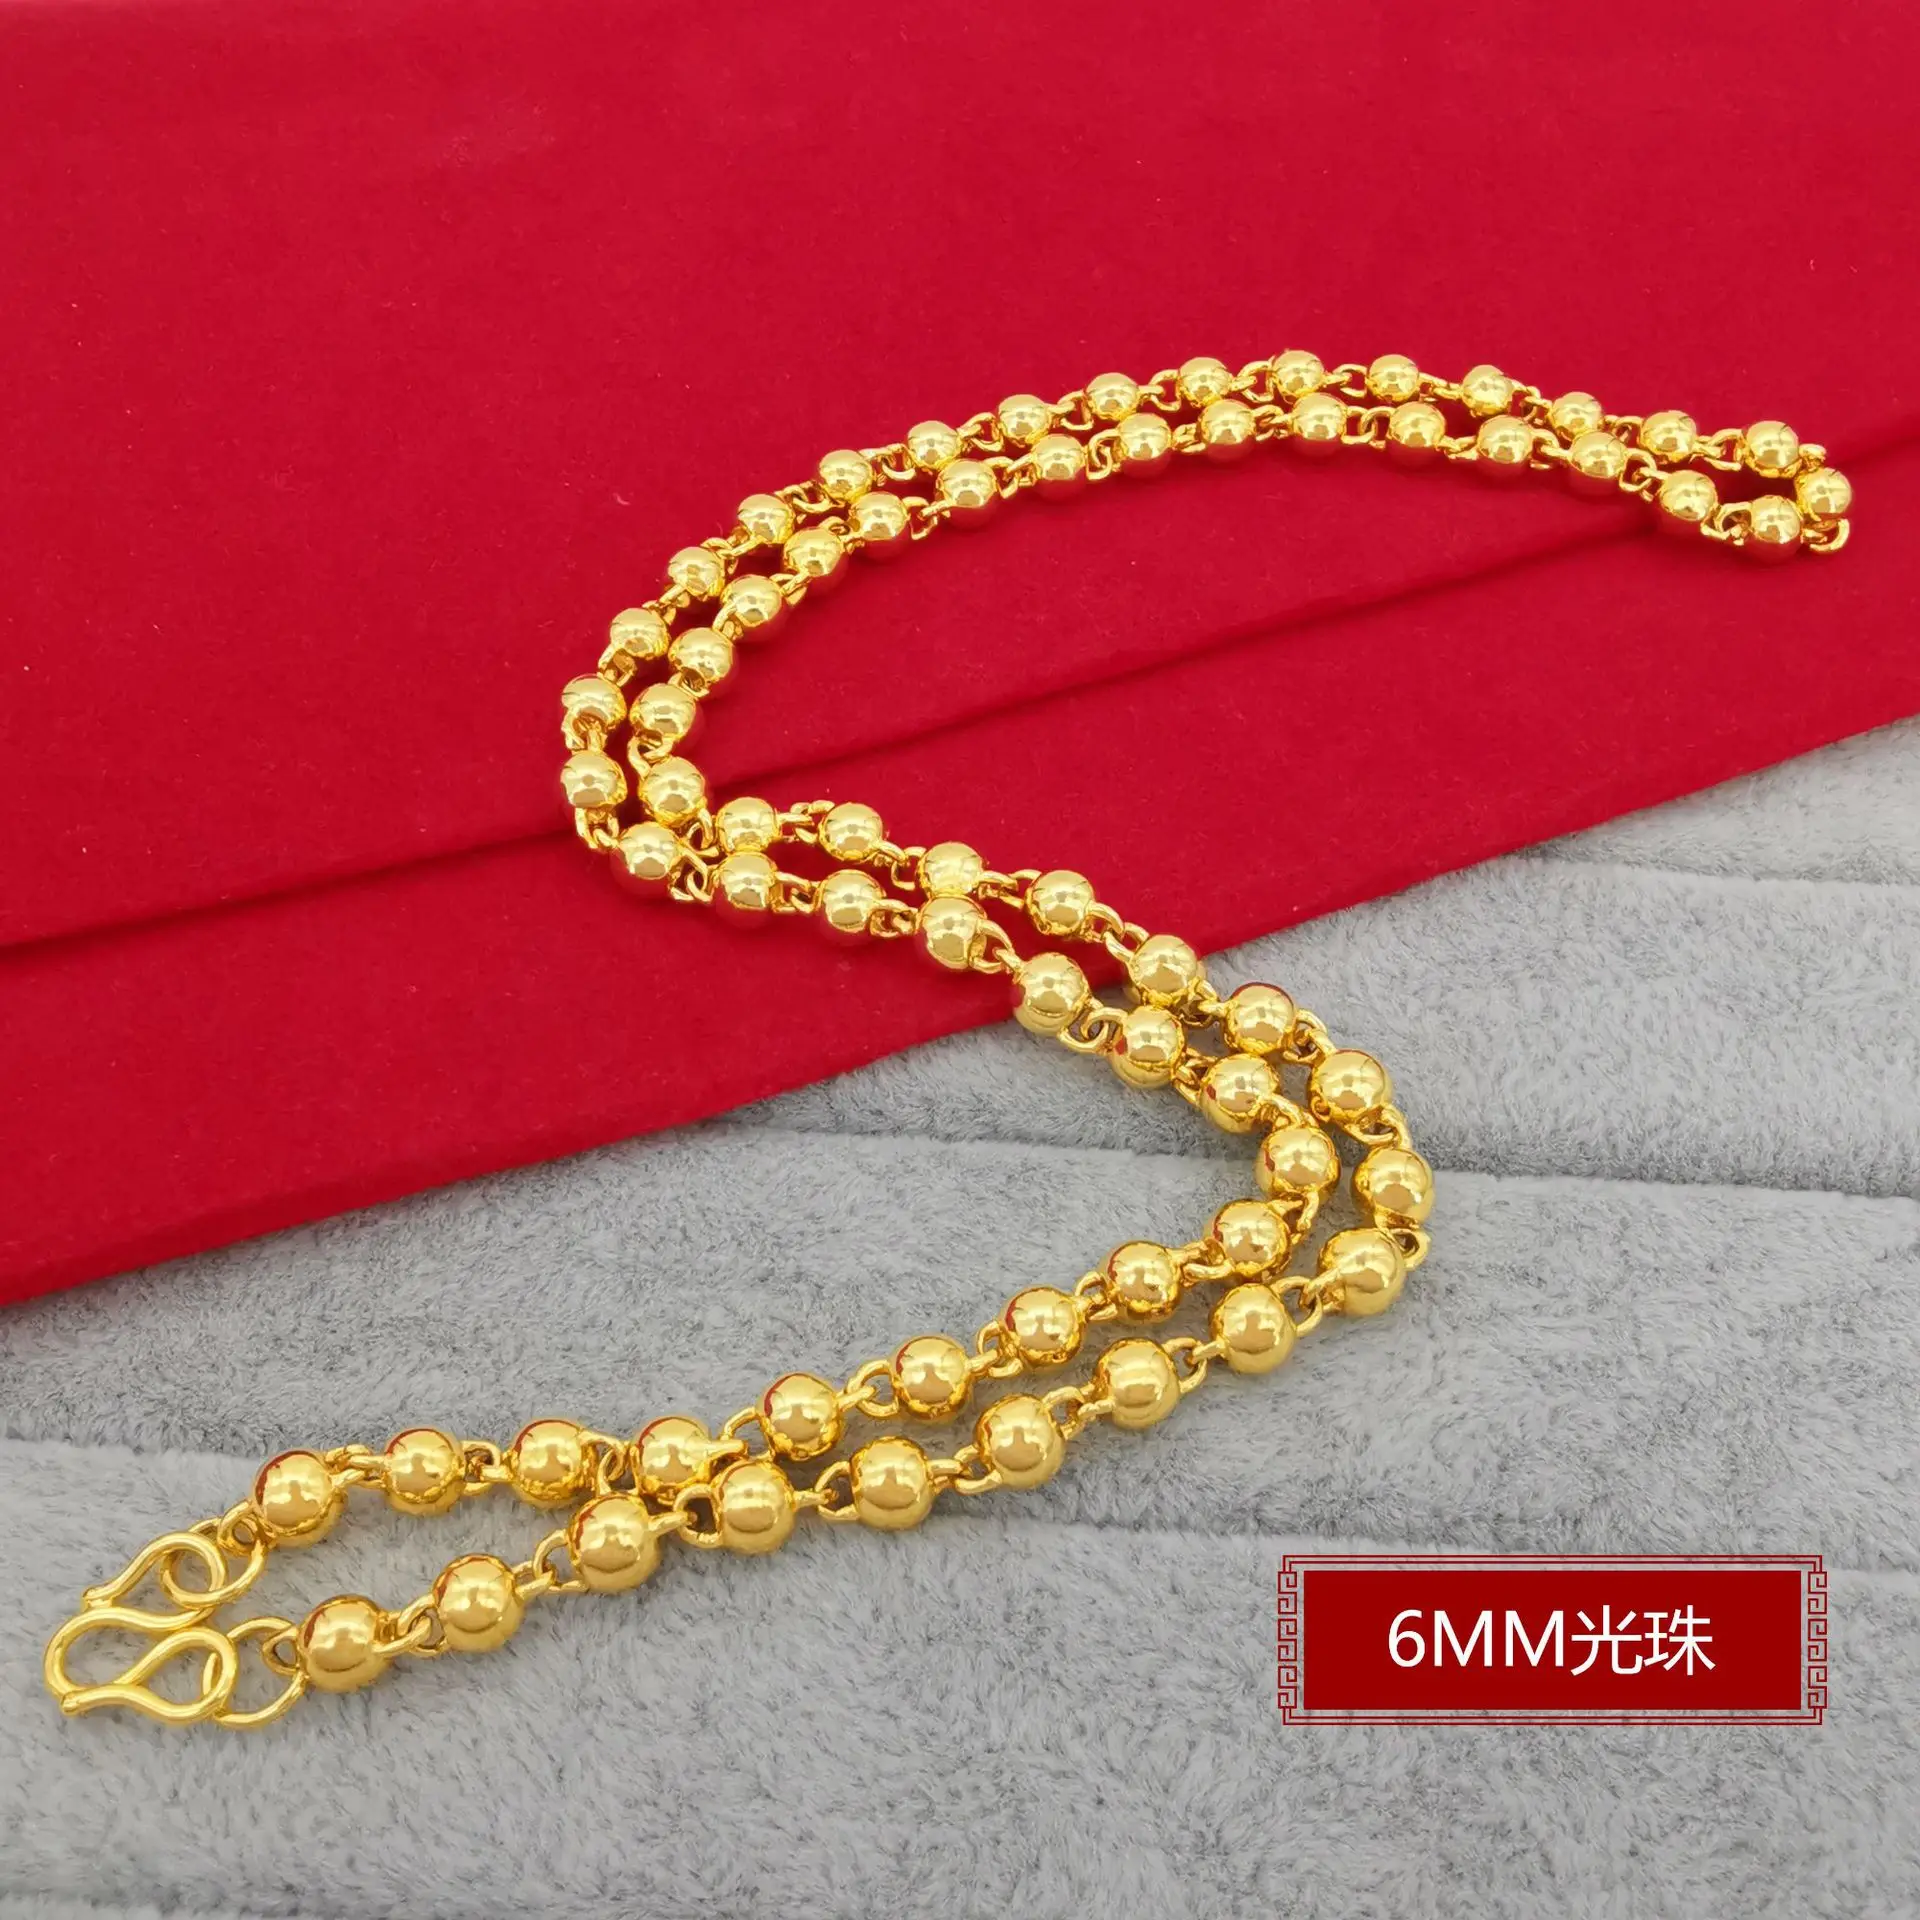 

SAIYE Hip Hop 24K Gold Plated 6MM-10MM Bead Men's Necklace Jewelry Gift